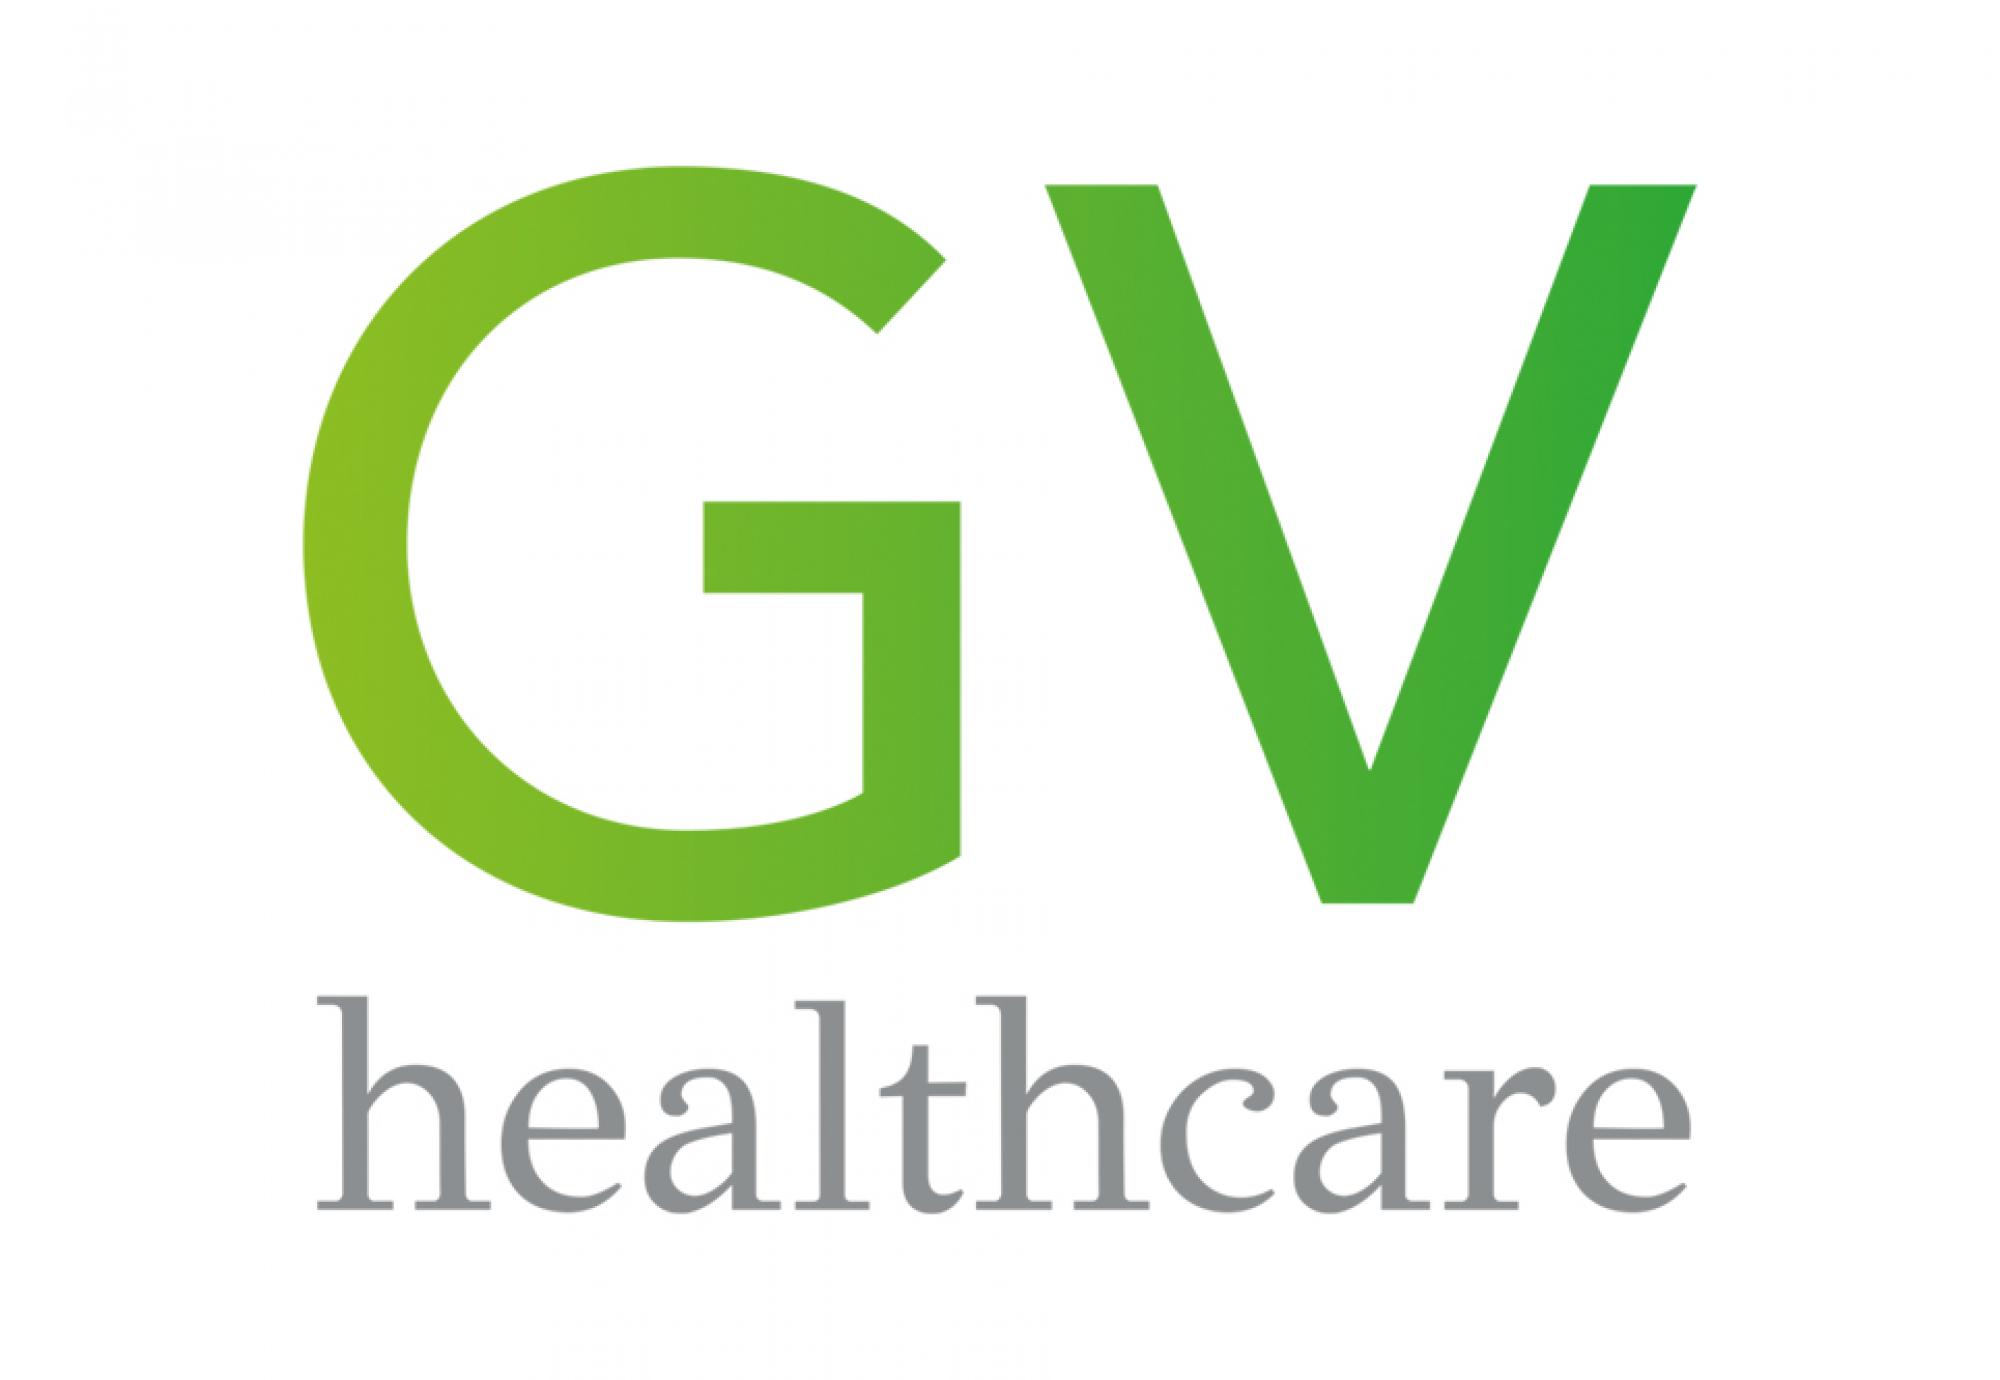 Global View/MyPorter launches GV Healthcare | UK Healthcare News